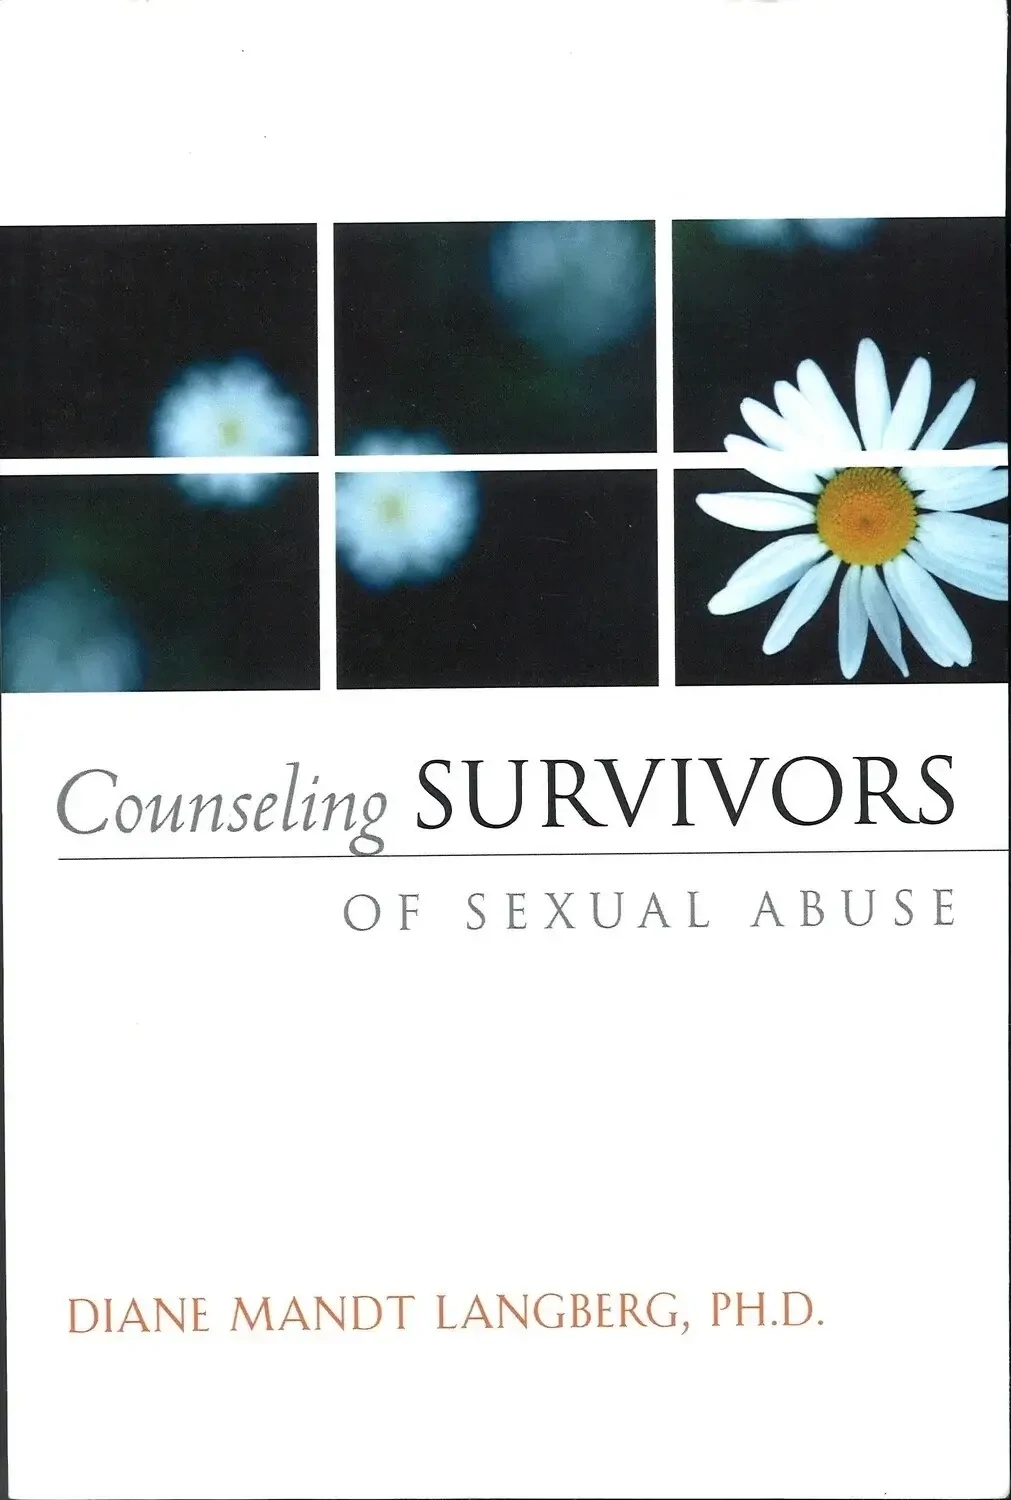 Counseling Survivors of Sexual Abuse, Diane Mandt Langberg